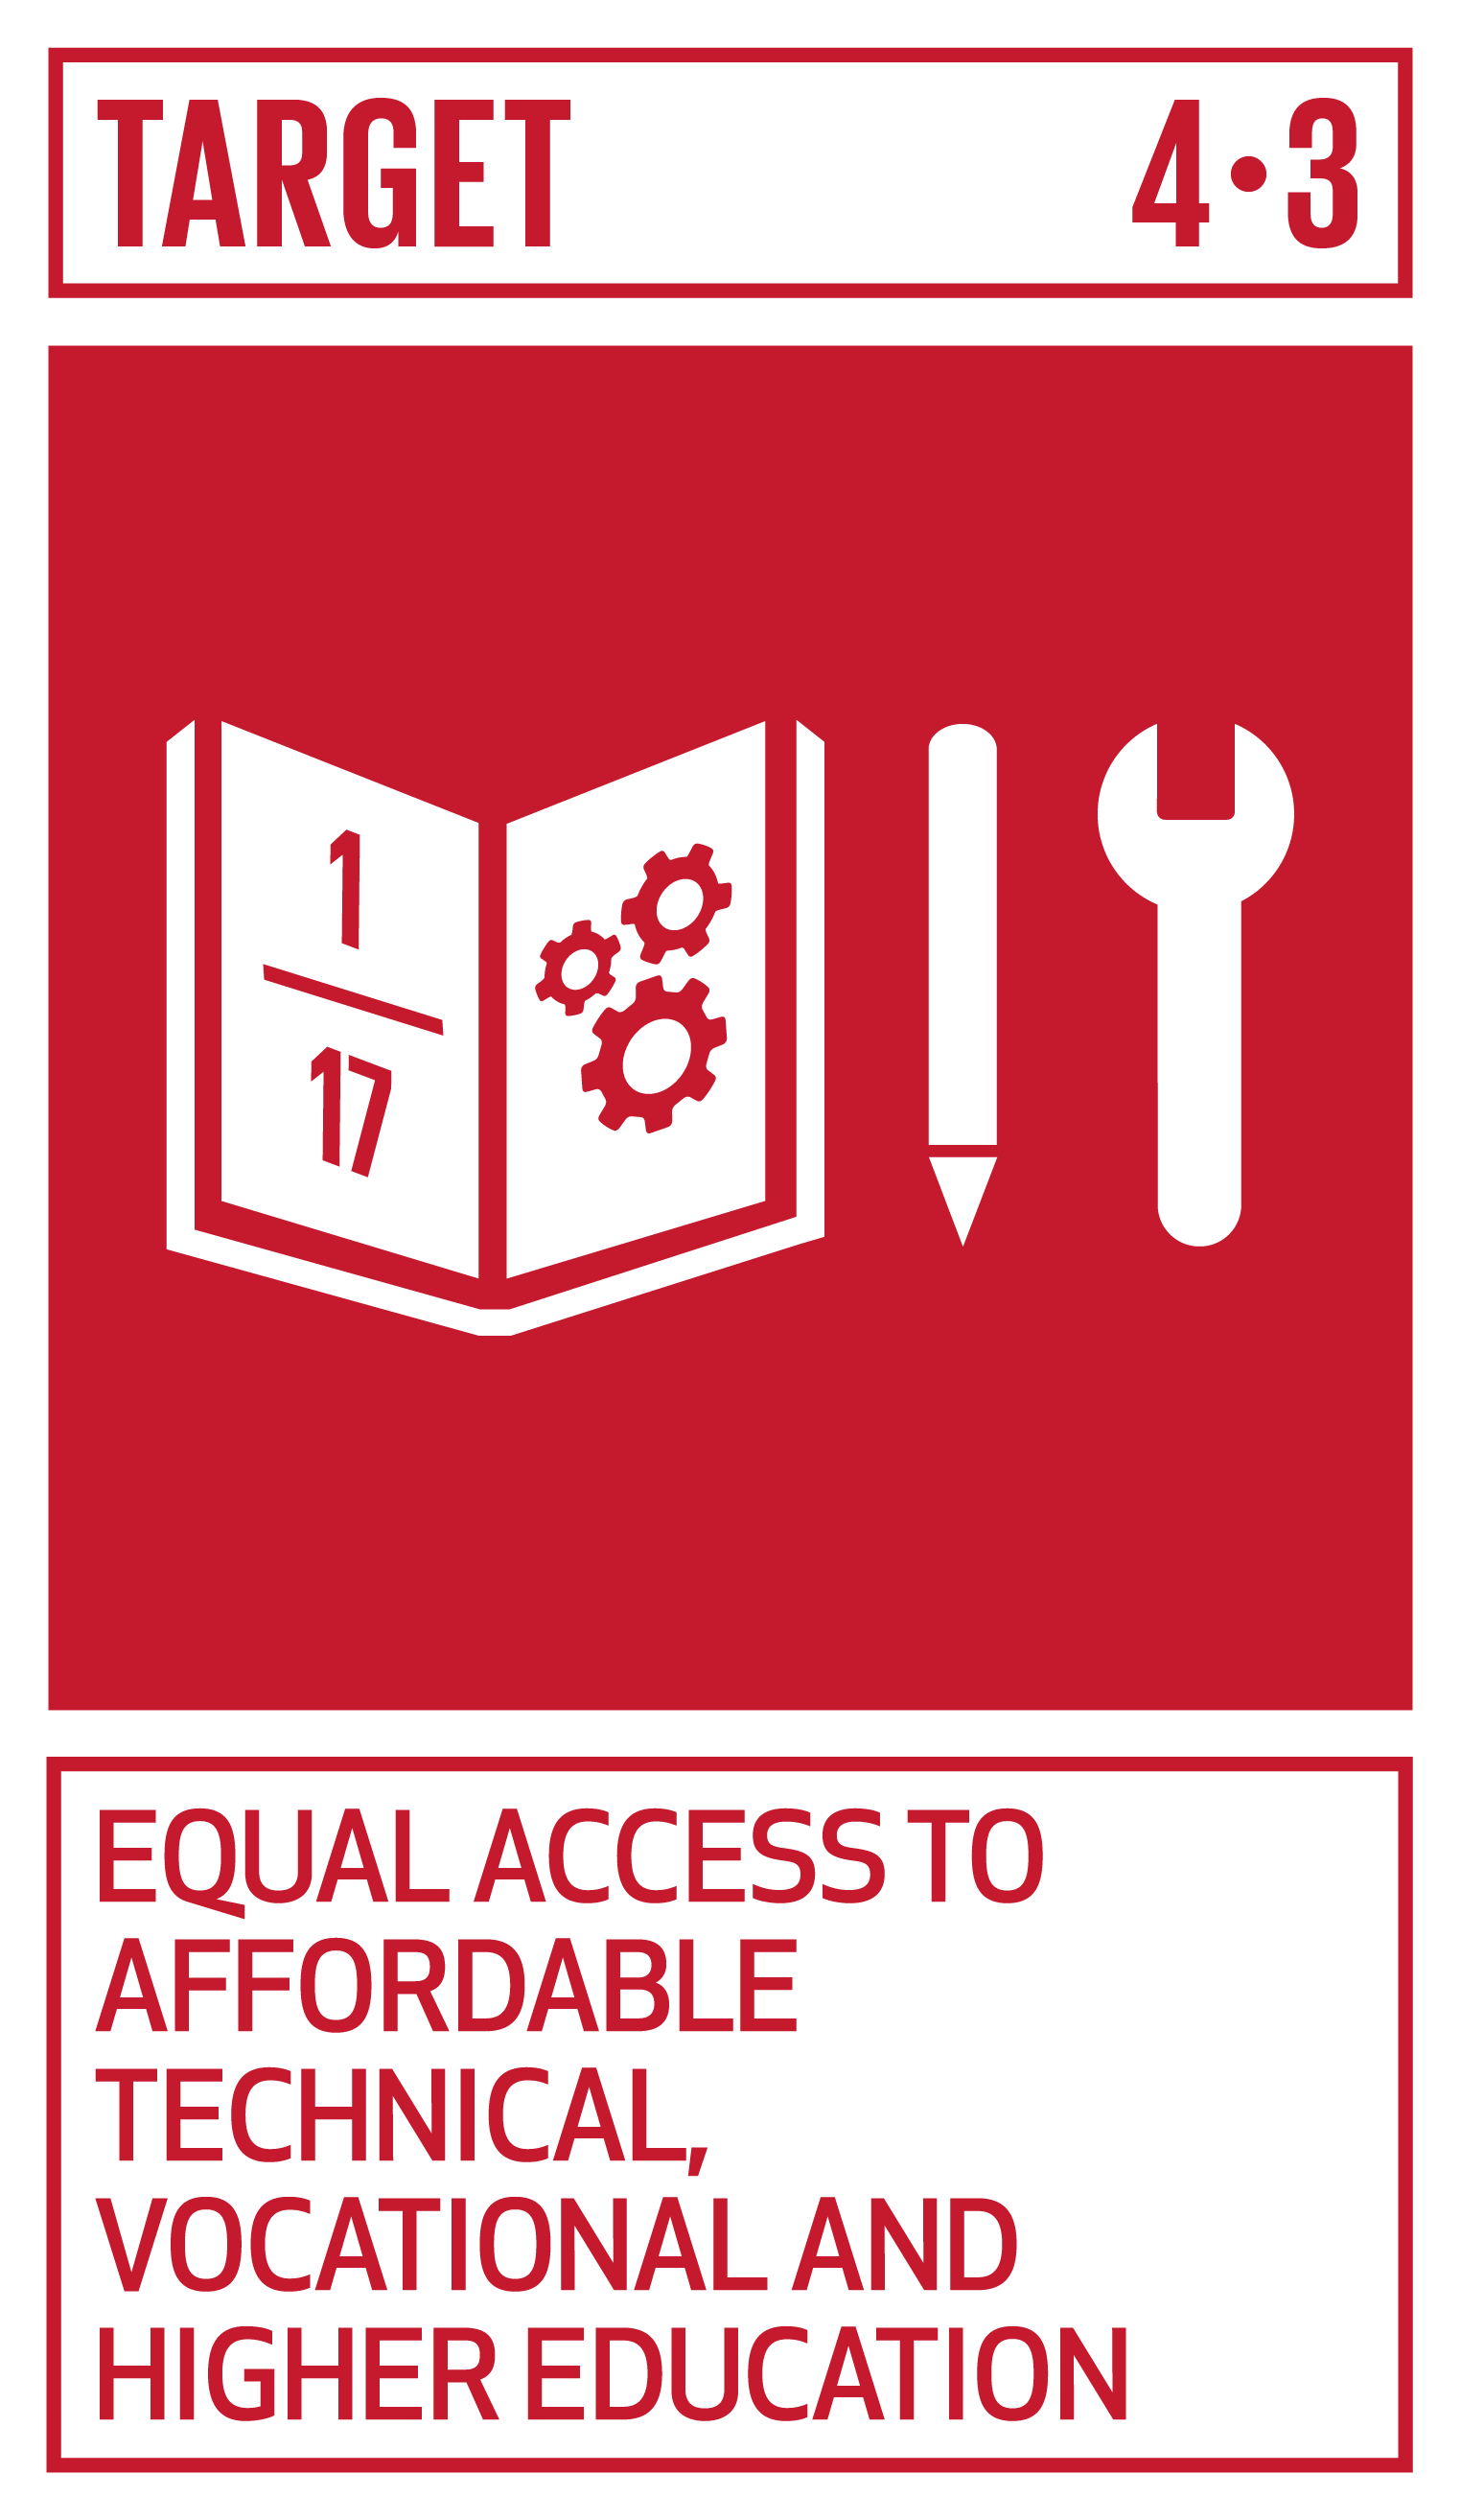 https://ocm.iccrom.org/sdgs/sdg-4-quality-education/sdg-43-equal-access-affordable-technical-vocational-and-higher